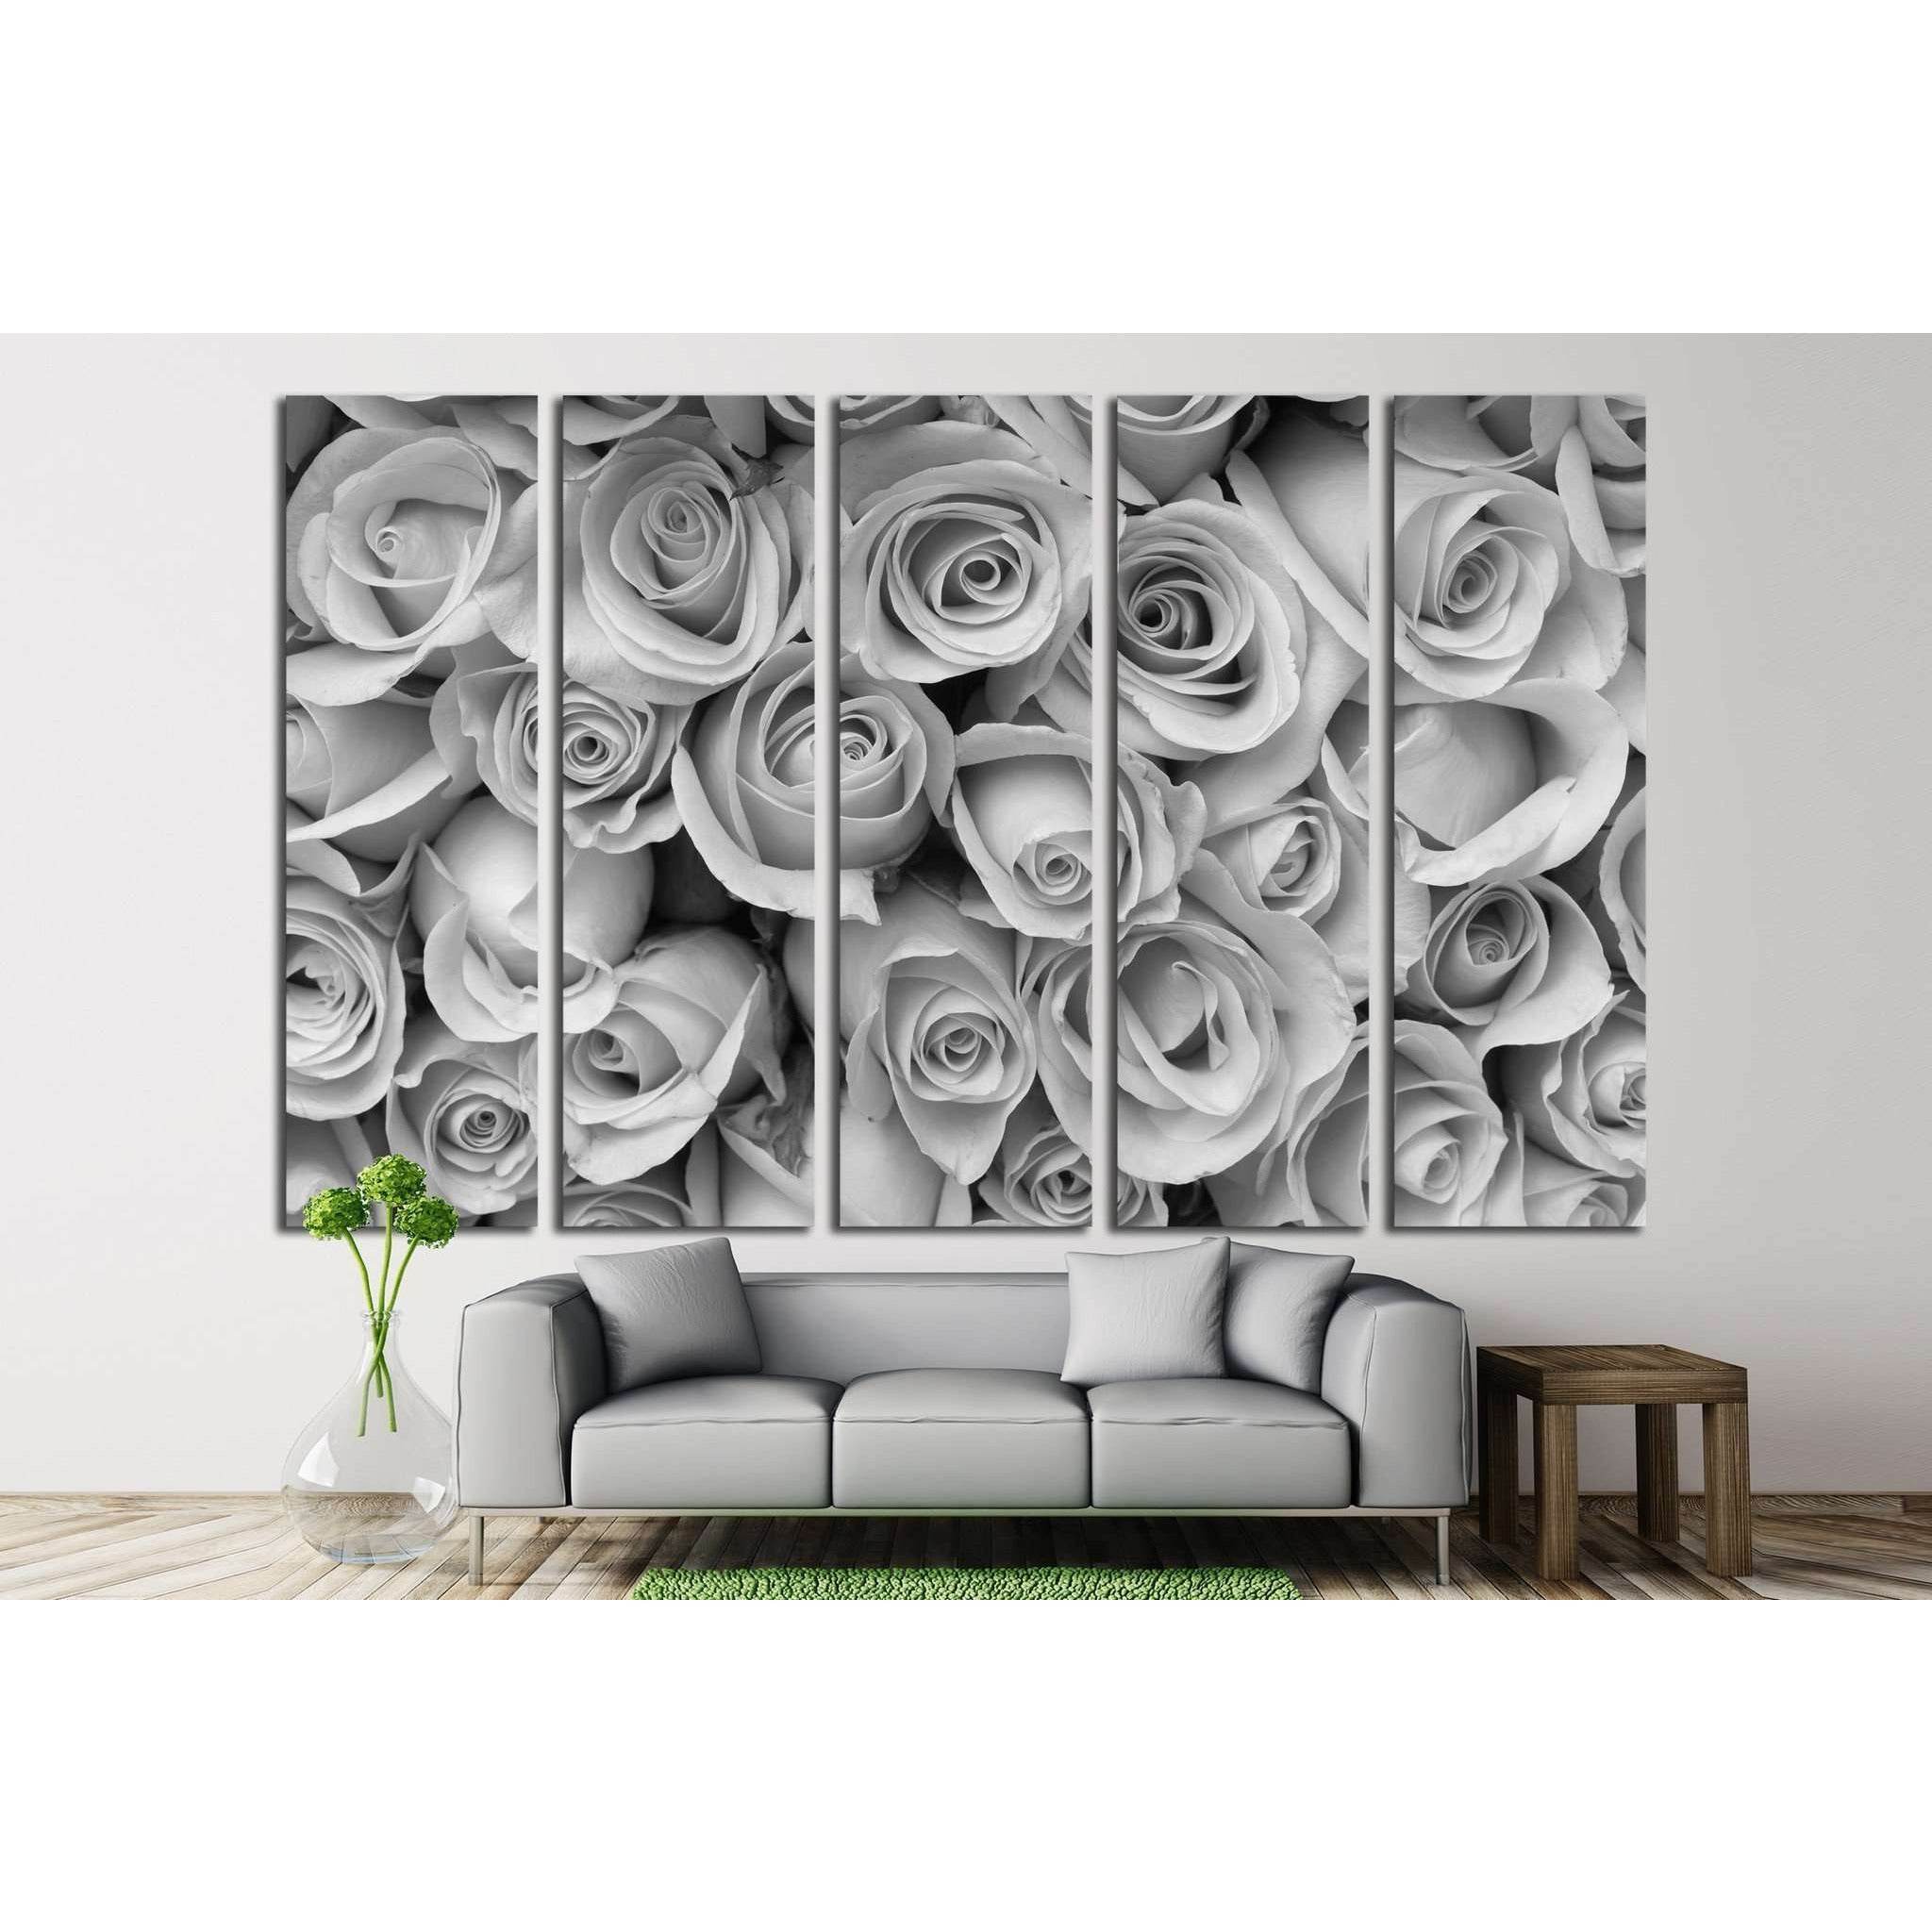 rose flower bouquet, black and white №1344 Ready to Hang Canvas Print